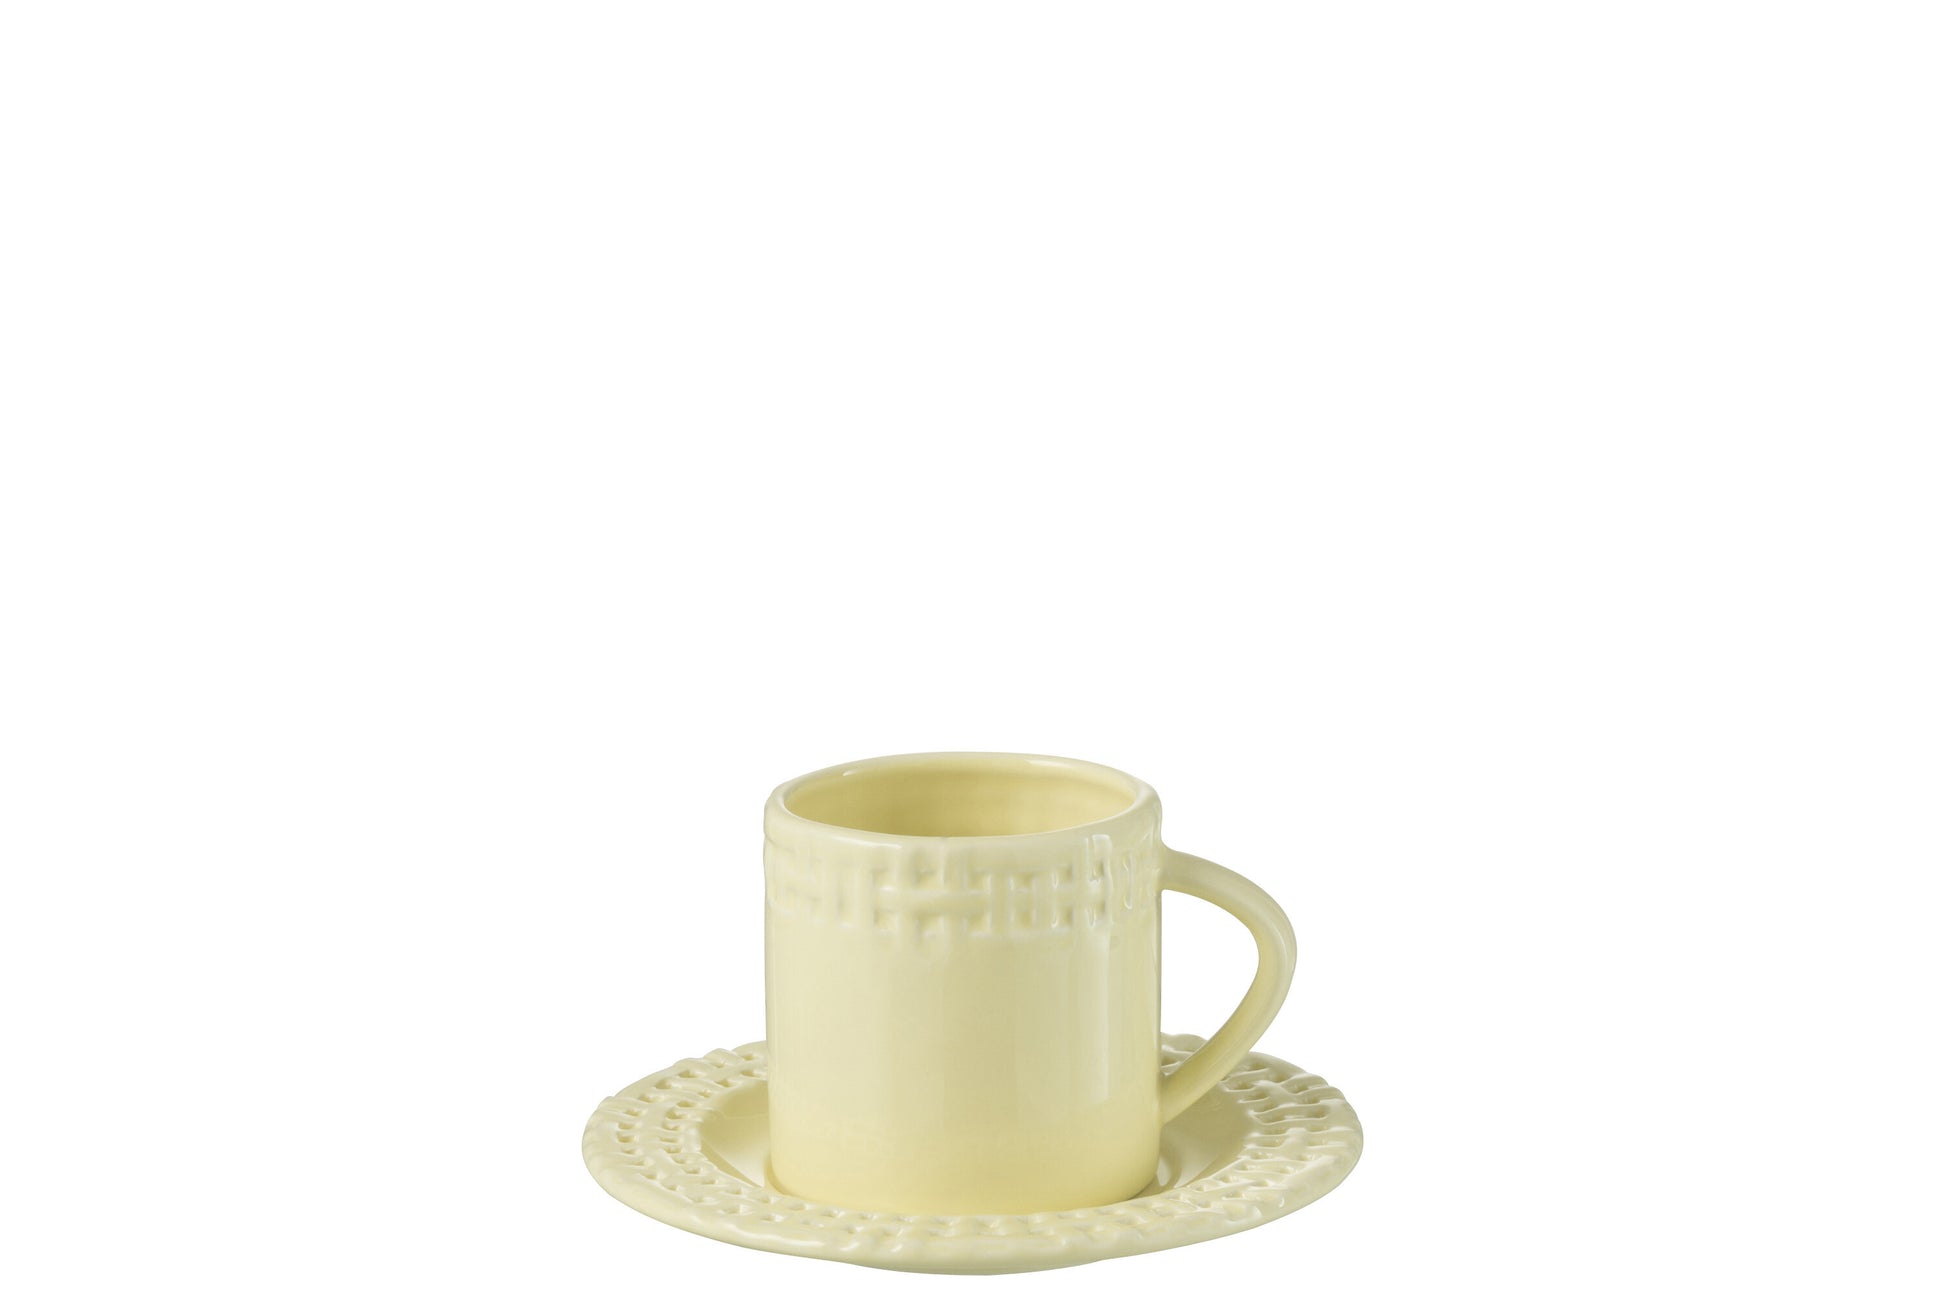 CUP AND SAUCER CERAMIC YELLOW